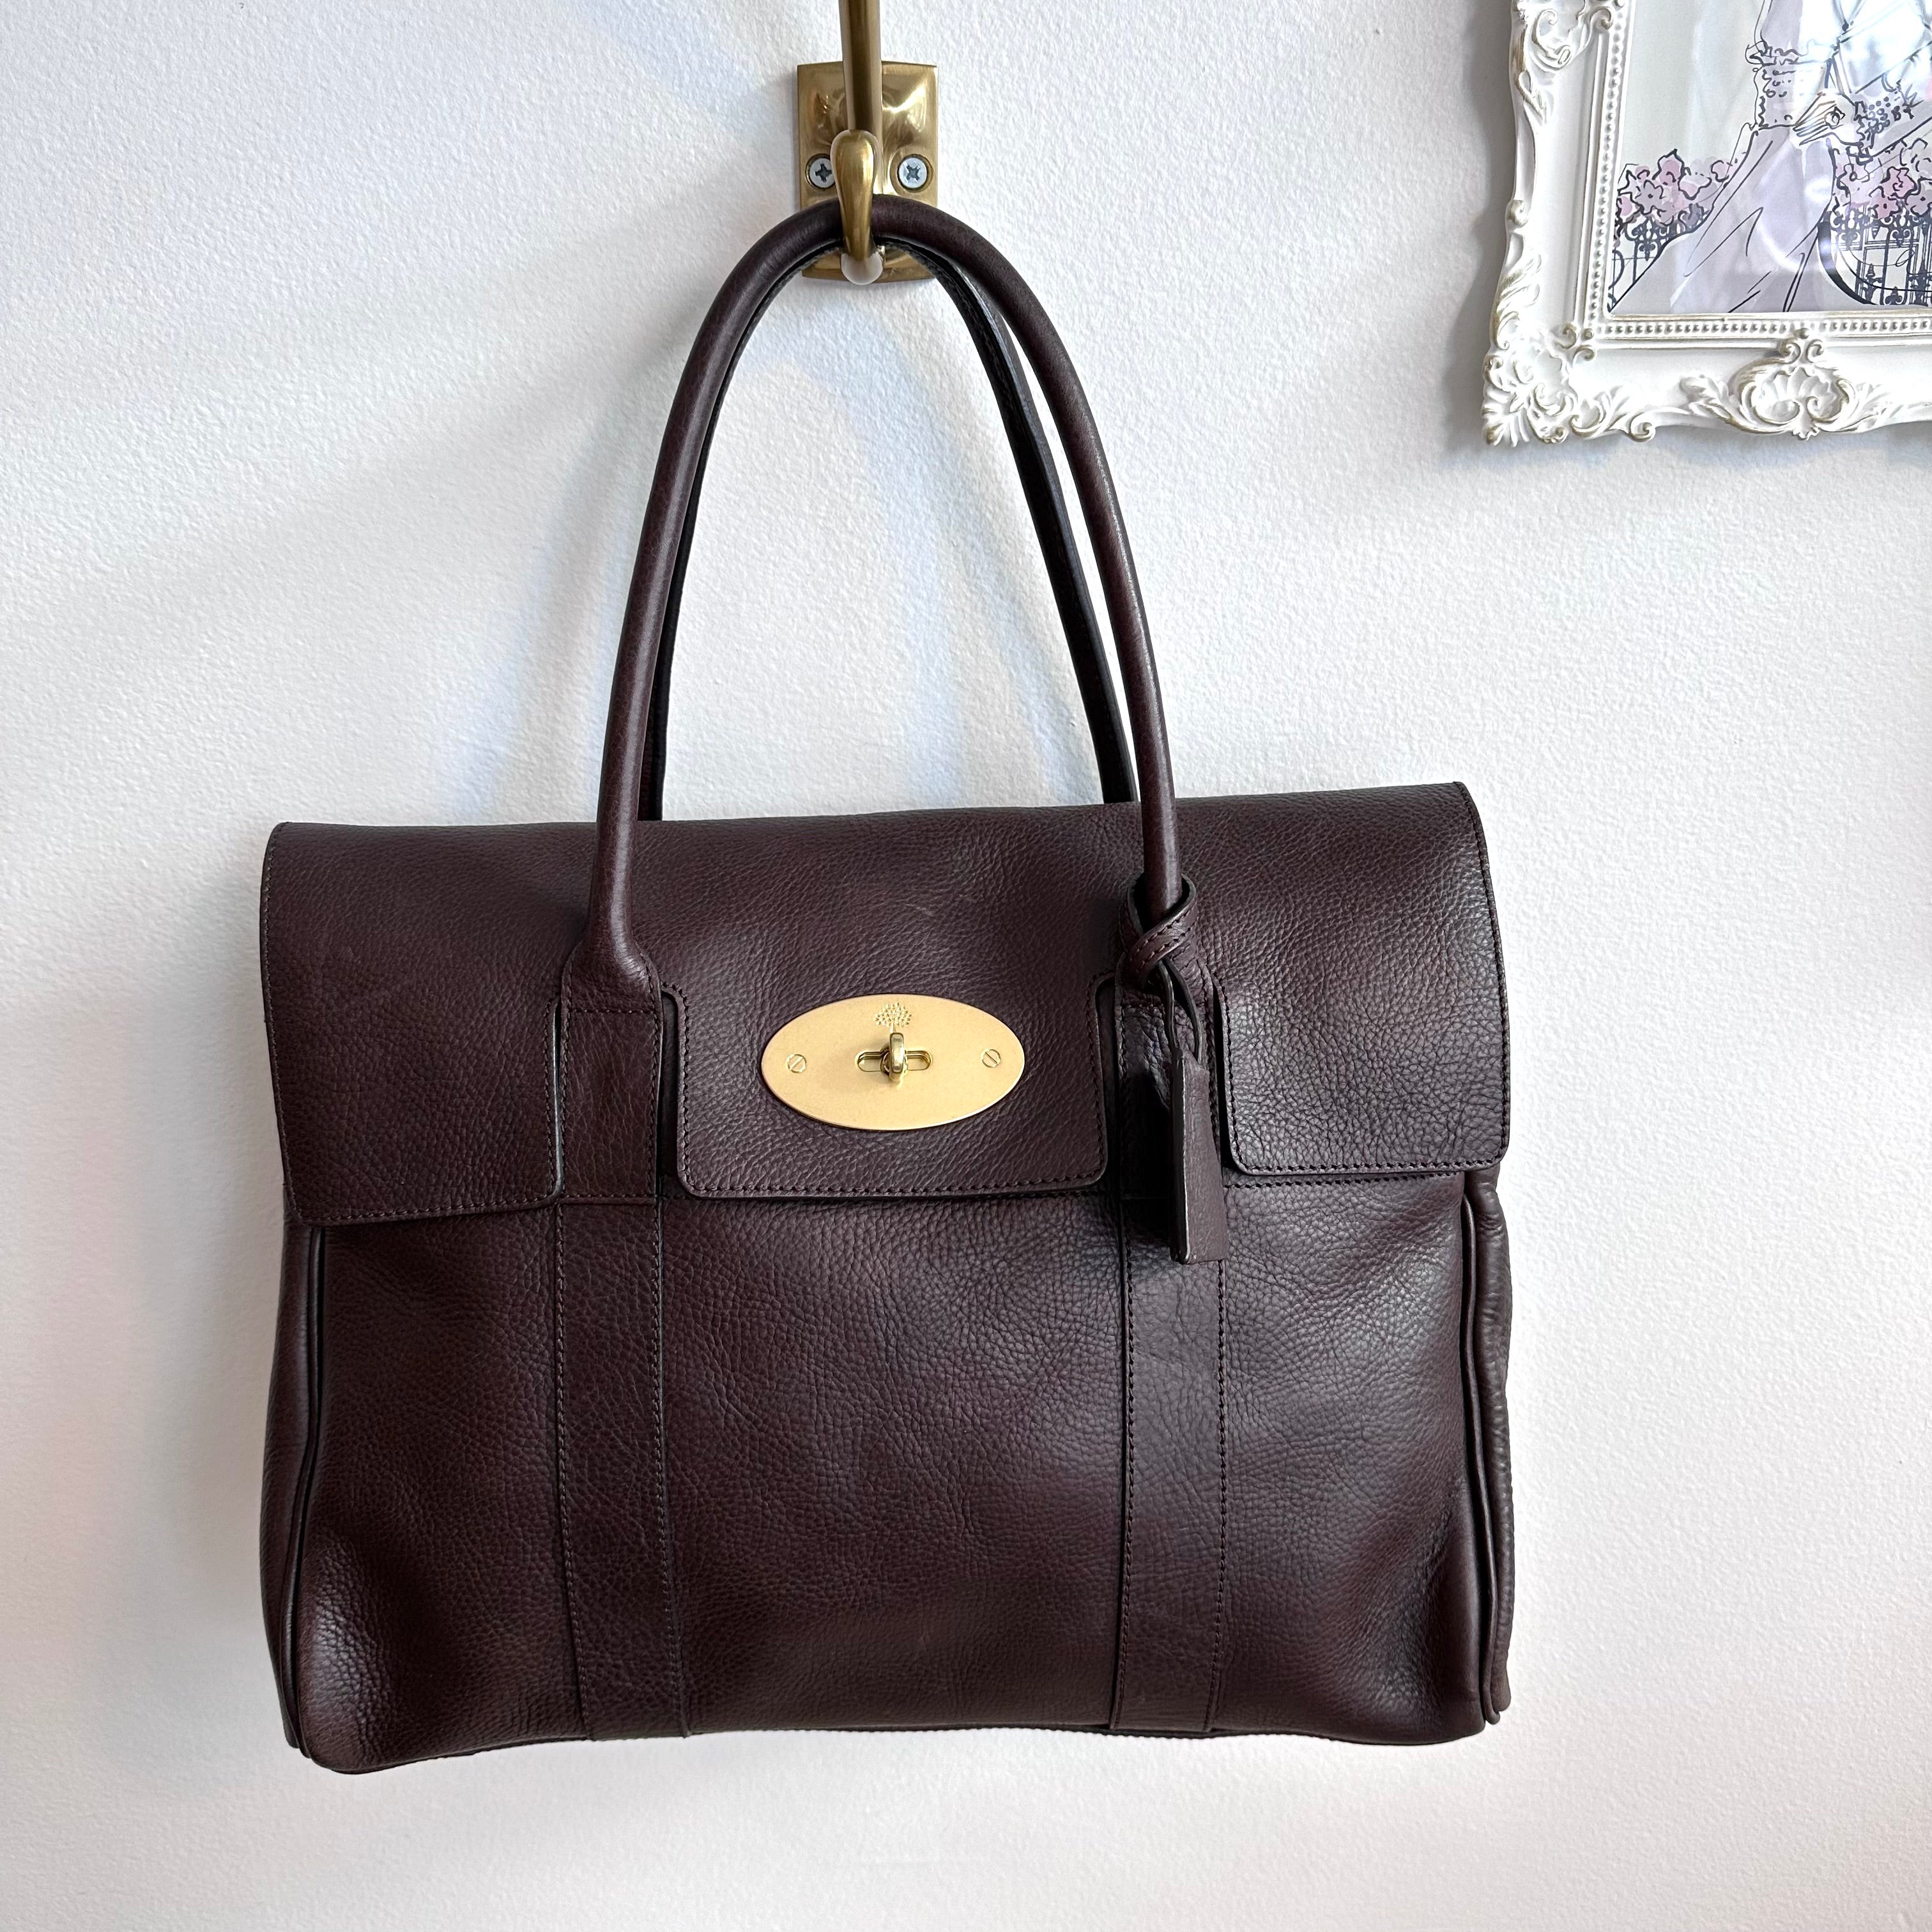 Pre-Owned MULBERRY Brown Leather Bayswater Classic Shoulder Bag